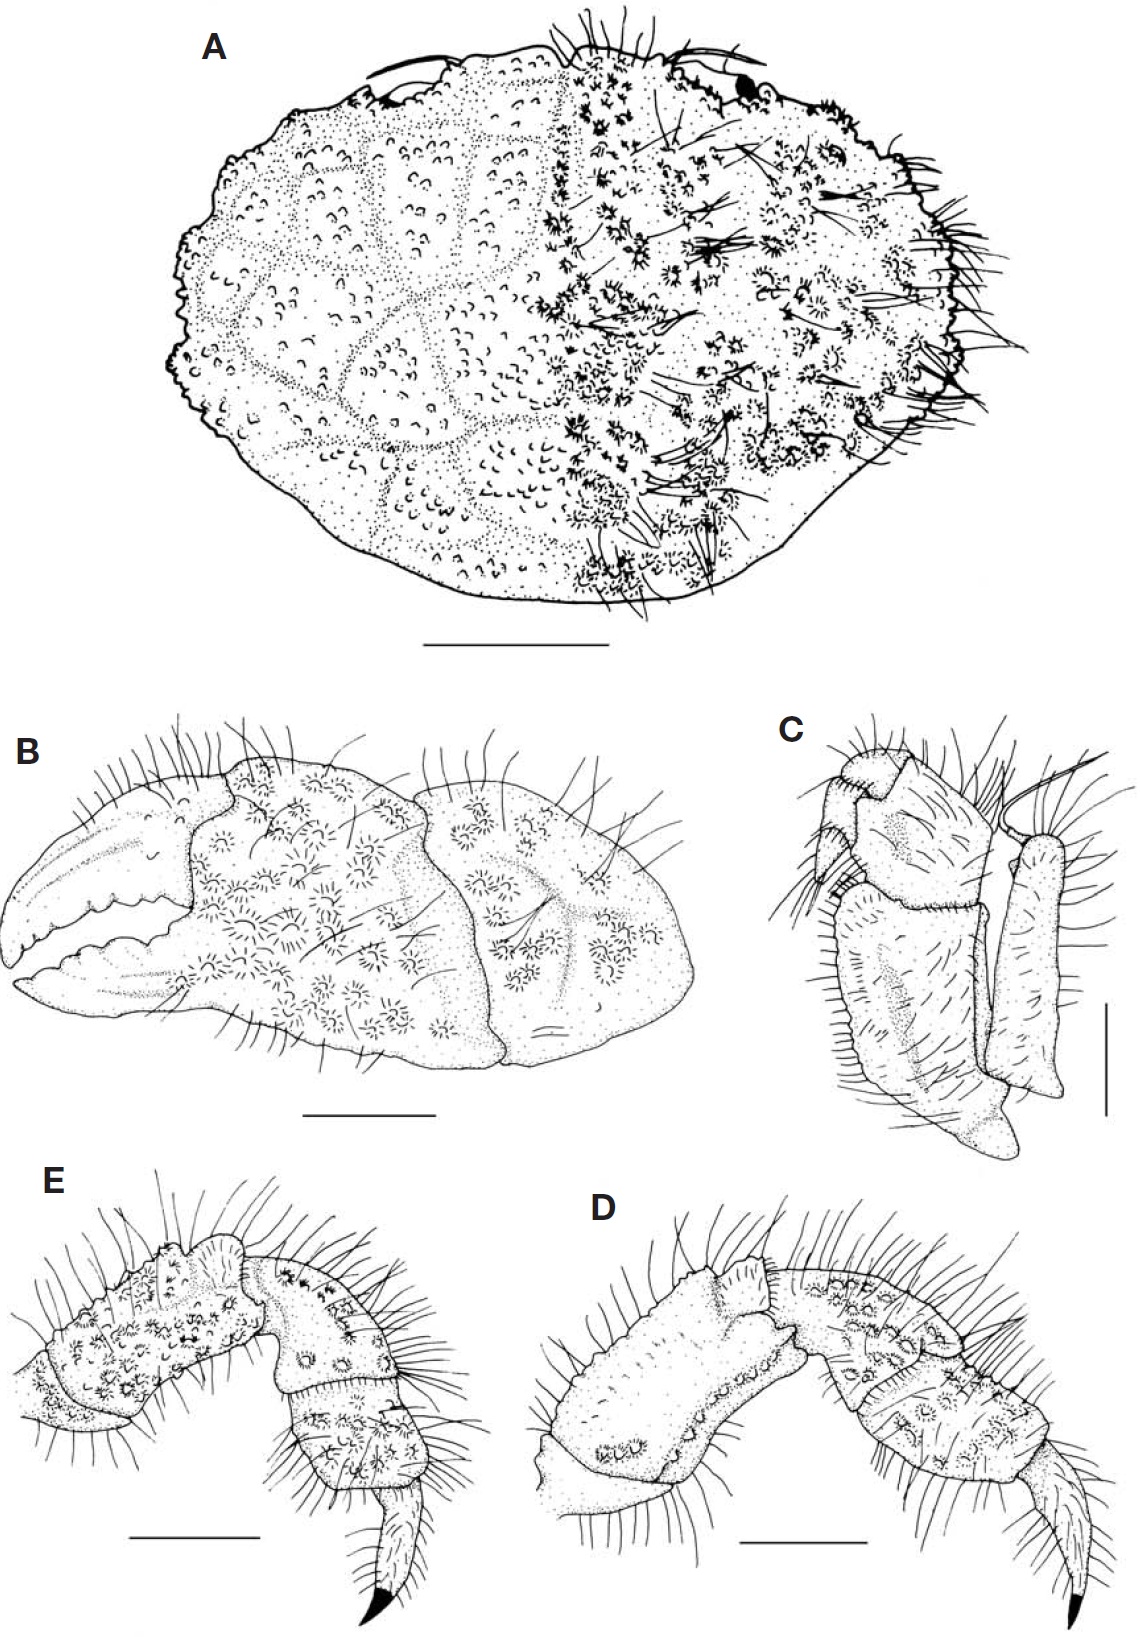 Gaillardiellus rueppelli (Krauss 1834). A Carapace dorsal view; B Left cheliped outer view; C Left 3rd maxilliped; D 3rd ambulatory leg dorsal view; E 4th ambulatory leg dorsal view. Note: seta on the left part of the carapace are omitted. Scale bars: A=10 mm B D E=5 mm C=3 mm.